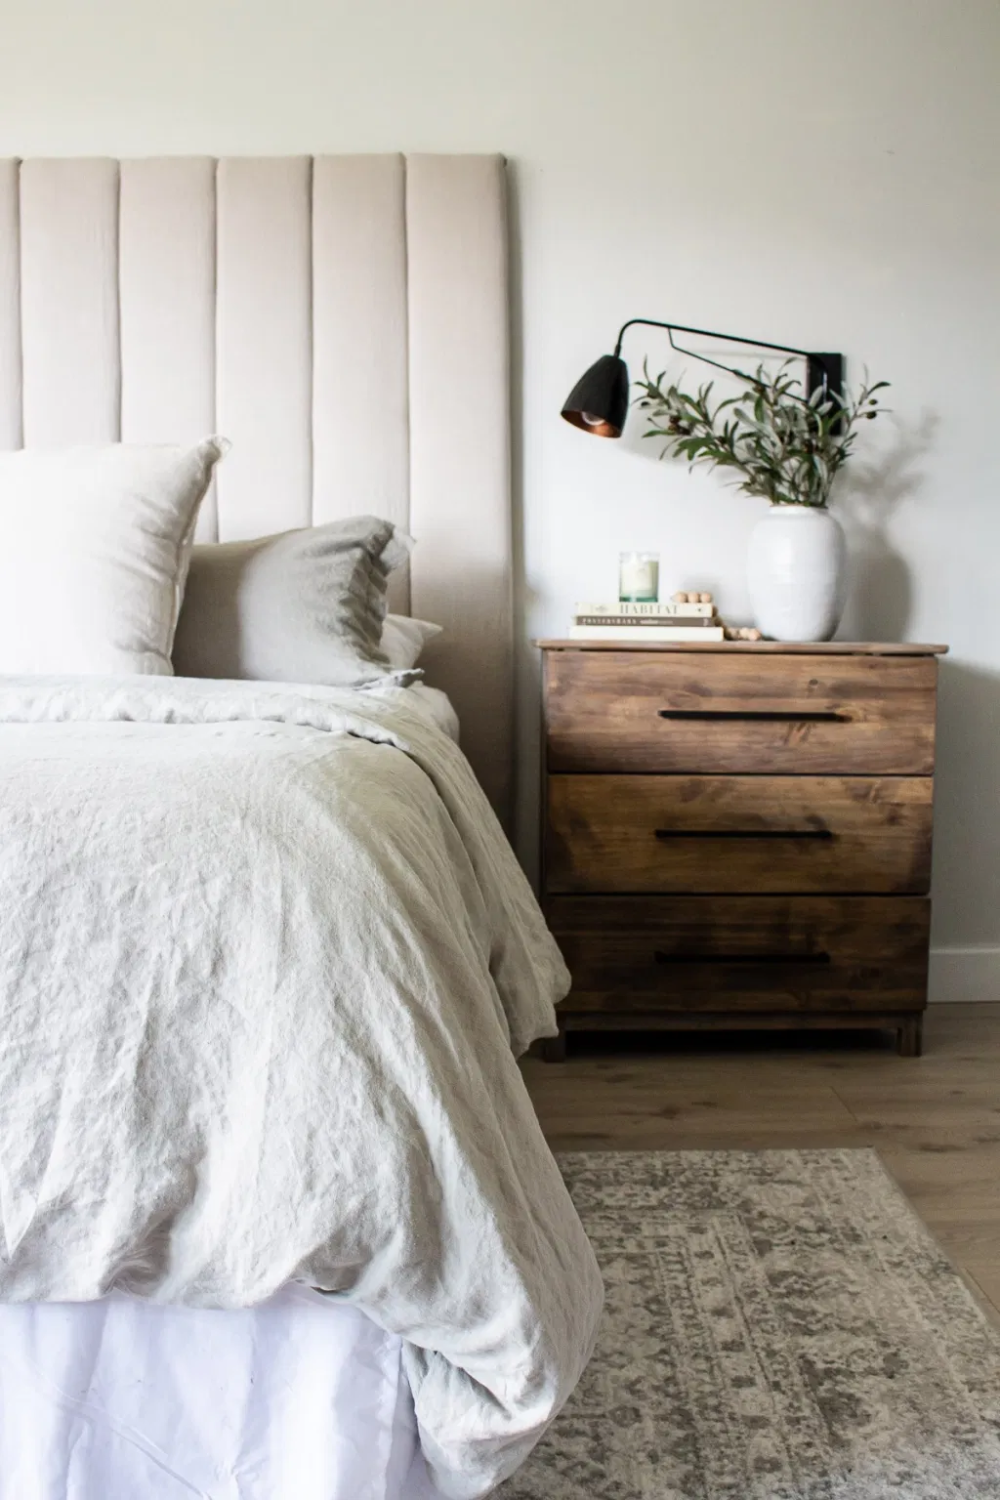 Easy process to make your bedroom dreamy
  with the help of upholstered headboard